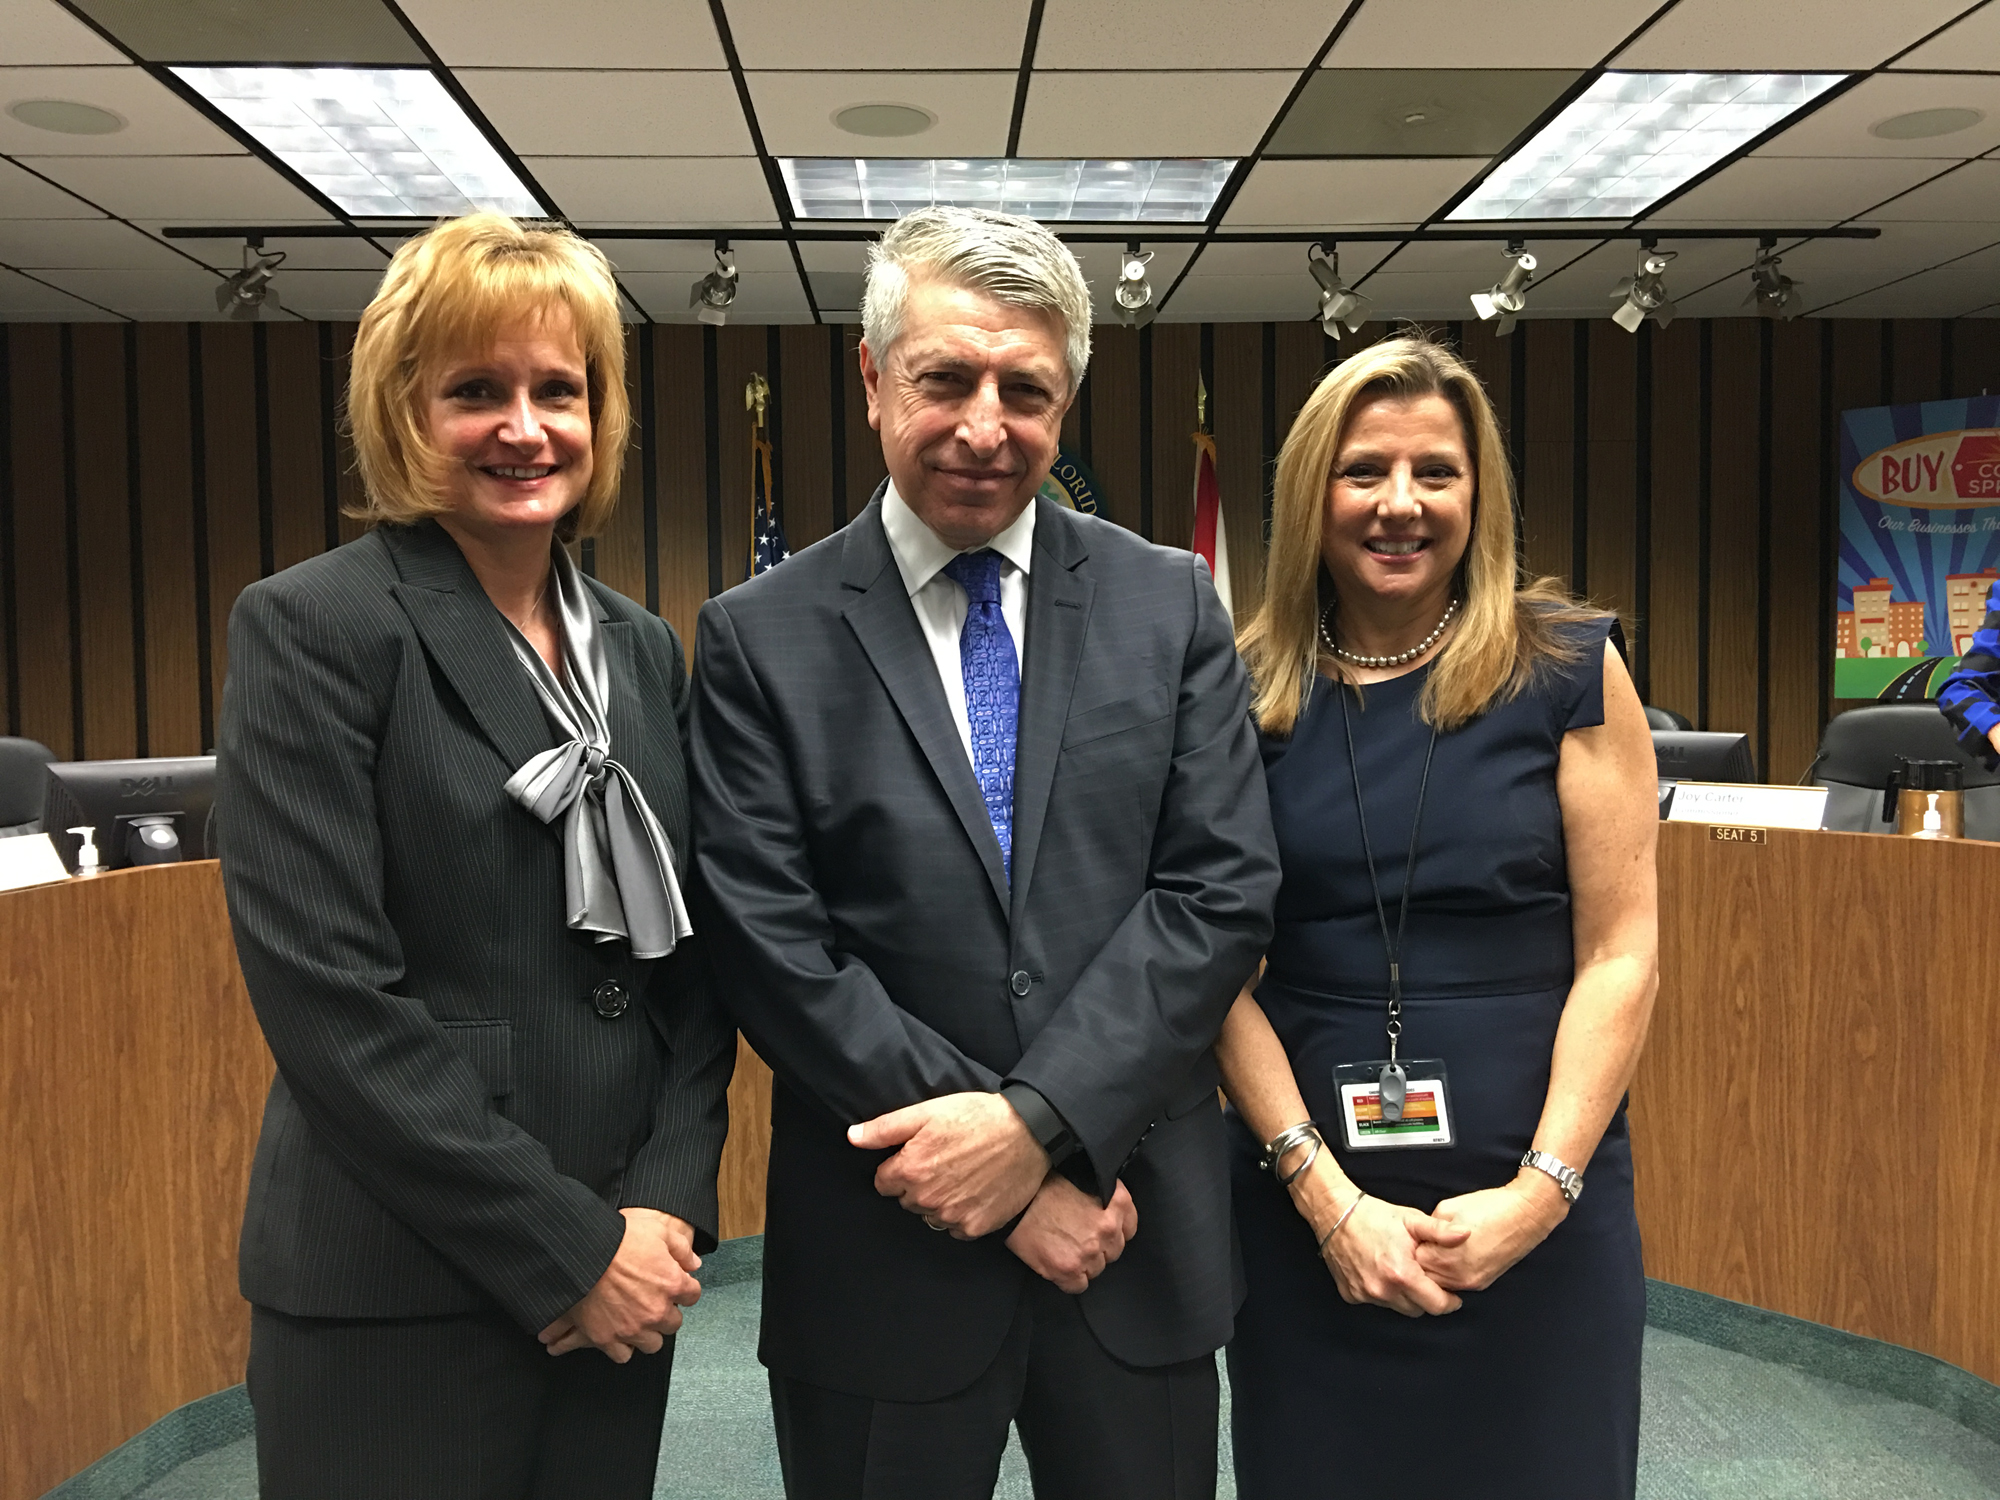 City Manager Erdal Dönmez pictured with Deputy City Managers Jennifer Bramley and Susan Grant on Wednesday.